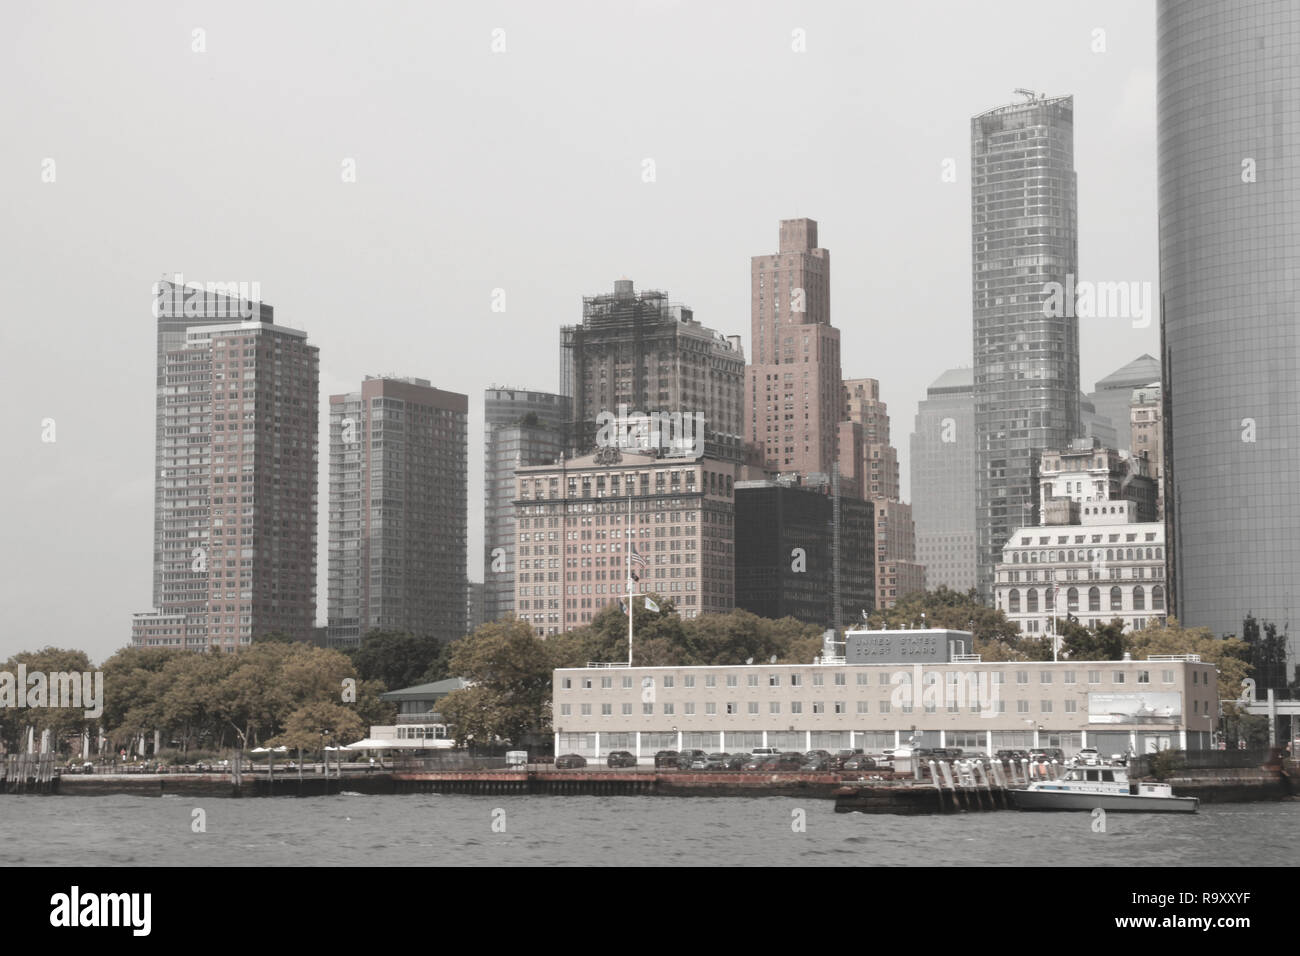 NEW YORK, USA - August 31, 2018: Cloudy day in New York. View of Manhattan skyline in NYC Stock Photo